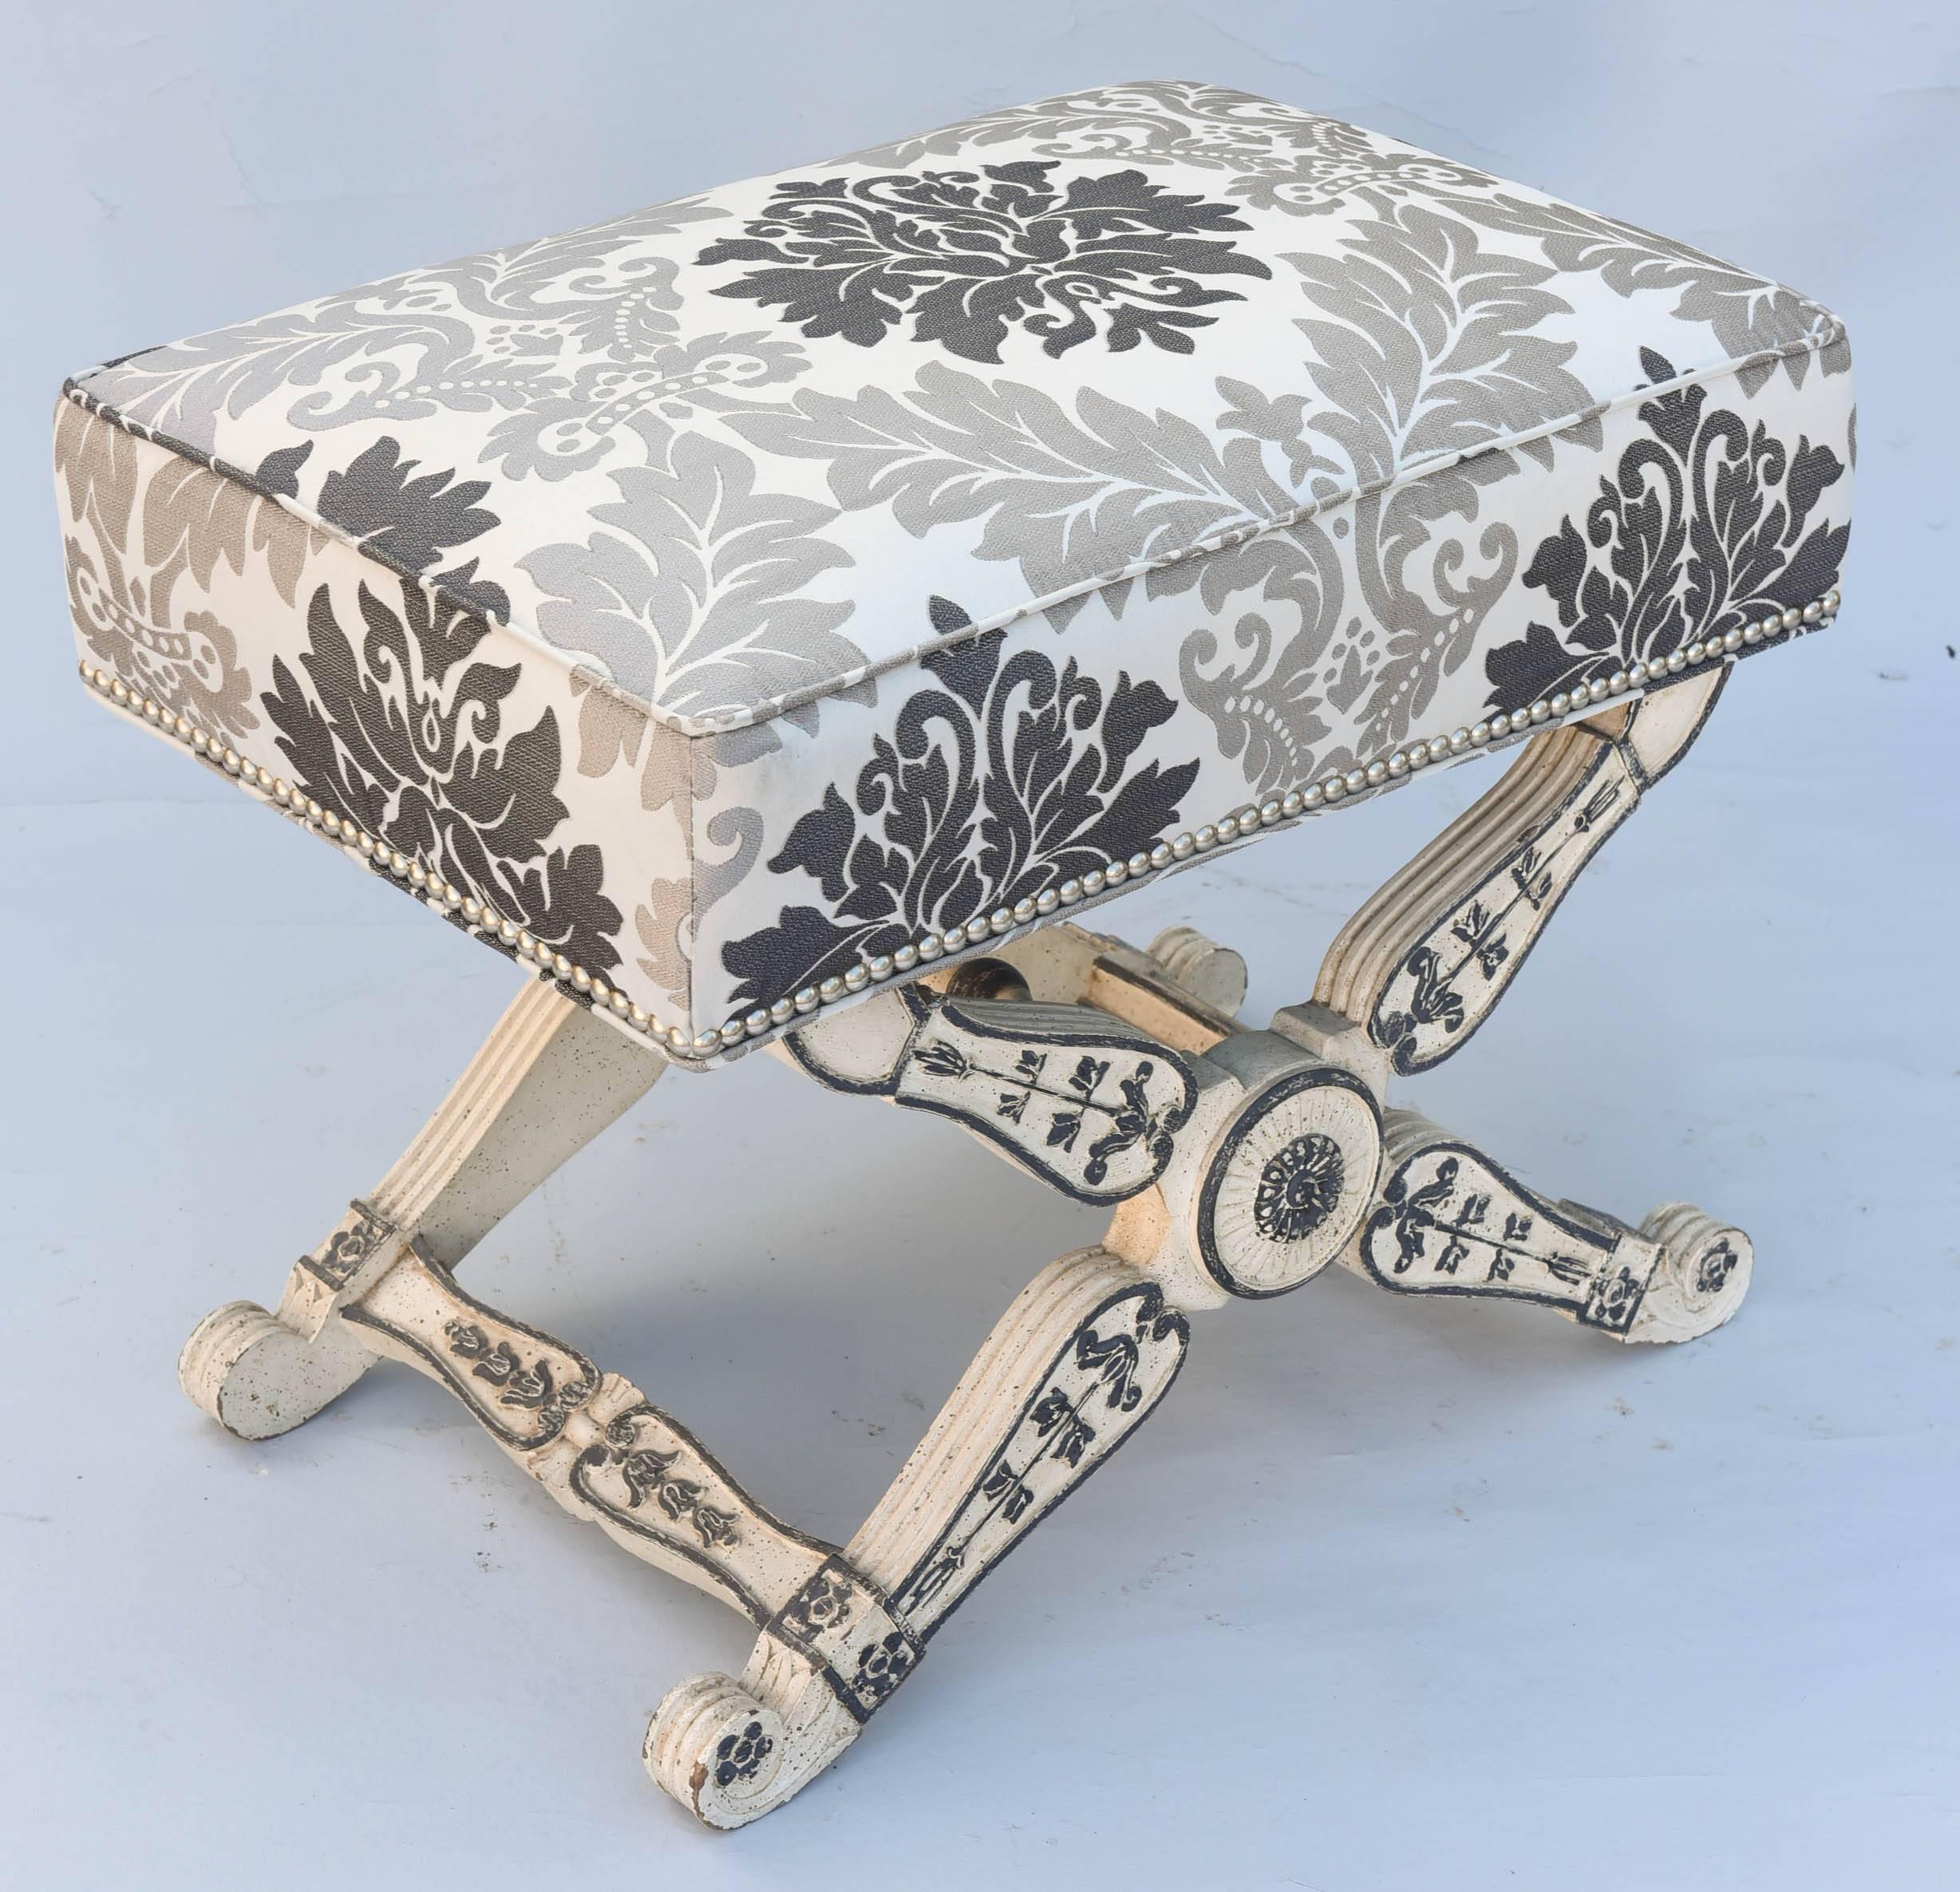 Stool, in Empire taste, having painted frame, upholstered seat with nailheads, raised on x-frame base, its fielded legs outcarved with bellflowers, centered by rosette, three turned stretchers join its legs.

Stock ID: D9250